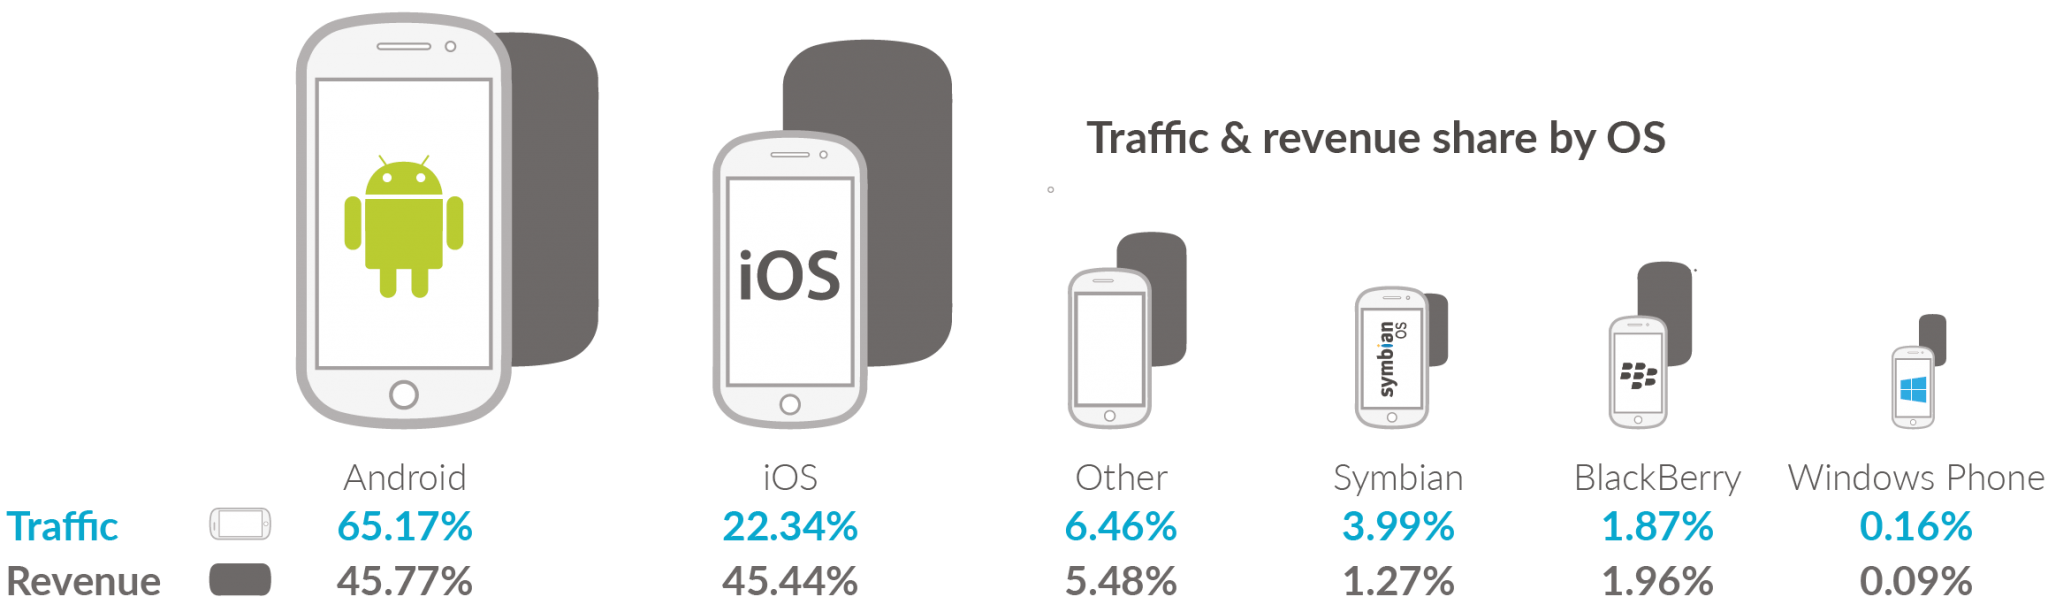 mobile-ad-revenue-by-os-q1-2015